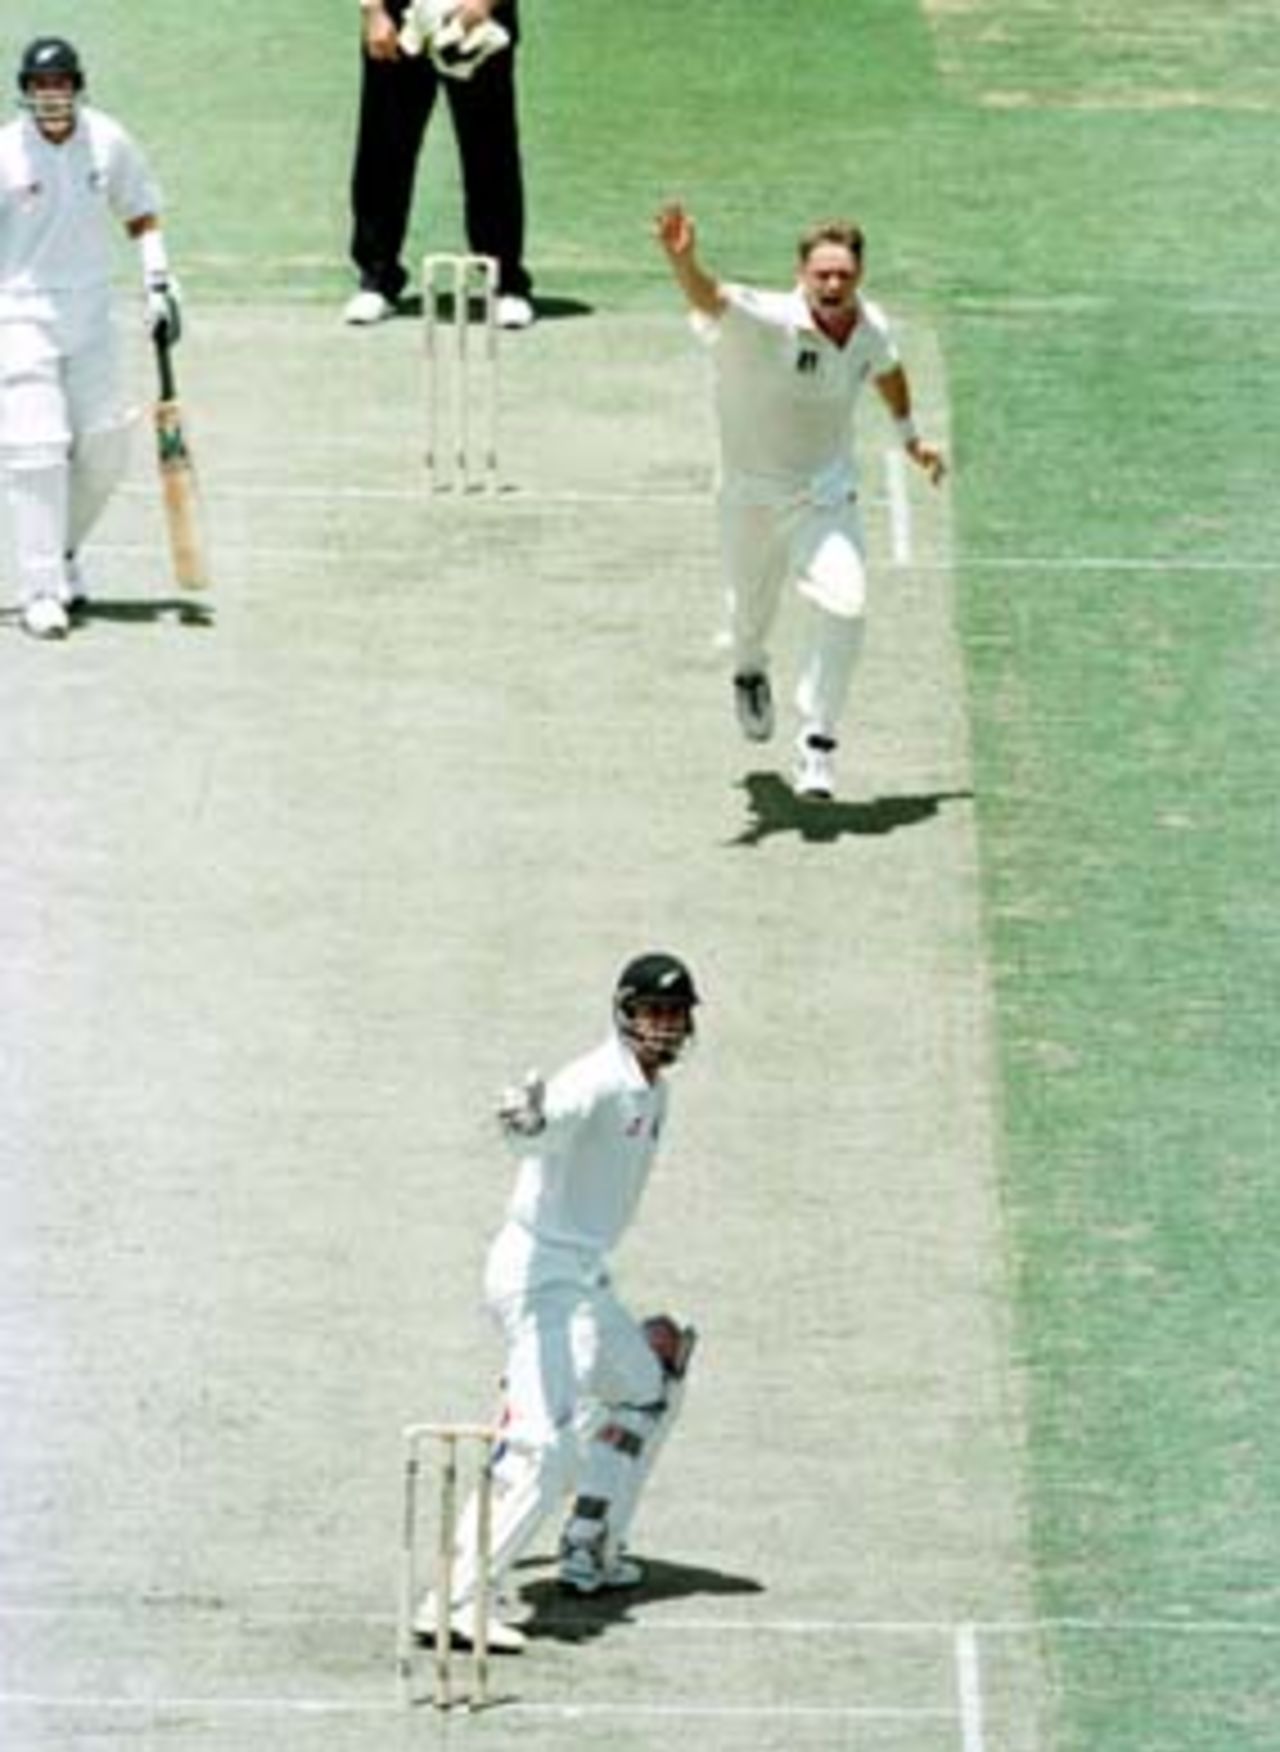 New Zealand's Pocock looks back in fear and new cap Simon Cook charges down in celebration as both watch Healy take a catch to dismiss the batsman and give Cook his first Test wicket. Australia v New Zealand 2nd Test at the WACA Perth, Day 1 Thursday Nov 20th 1997.